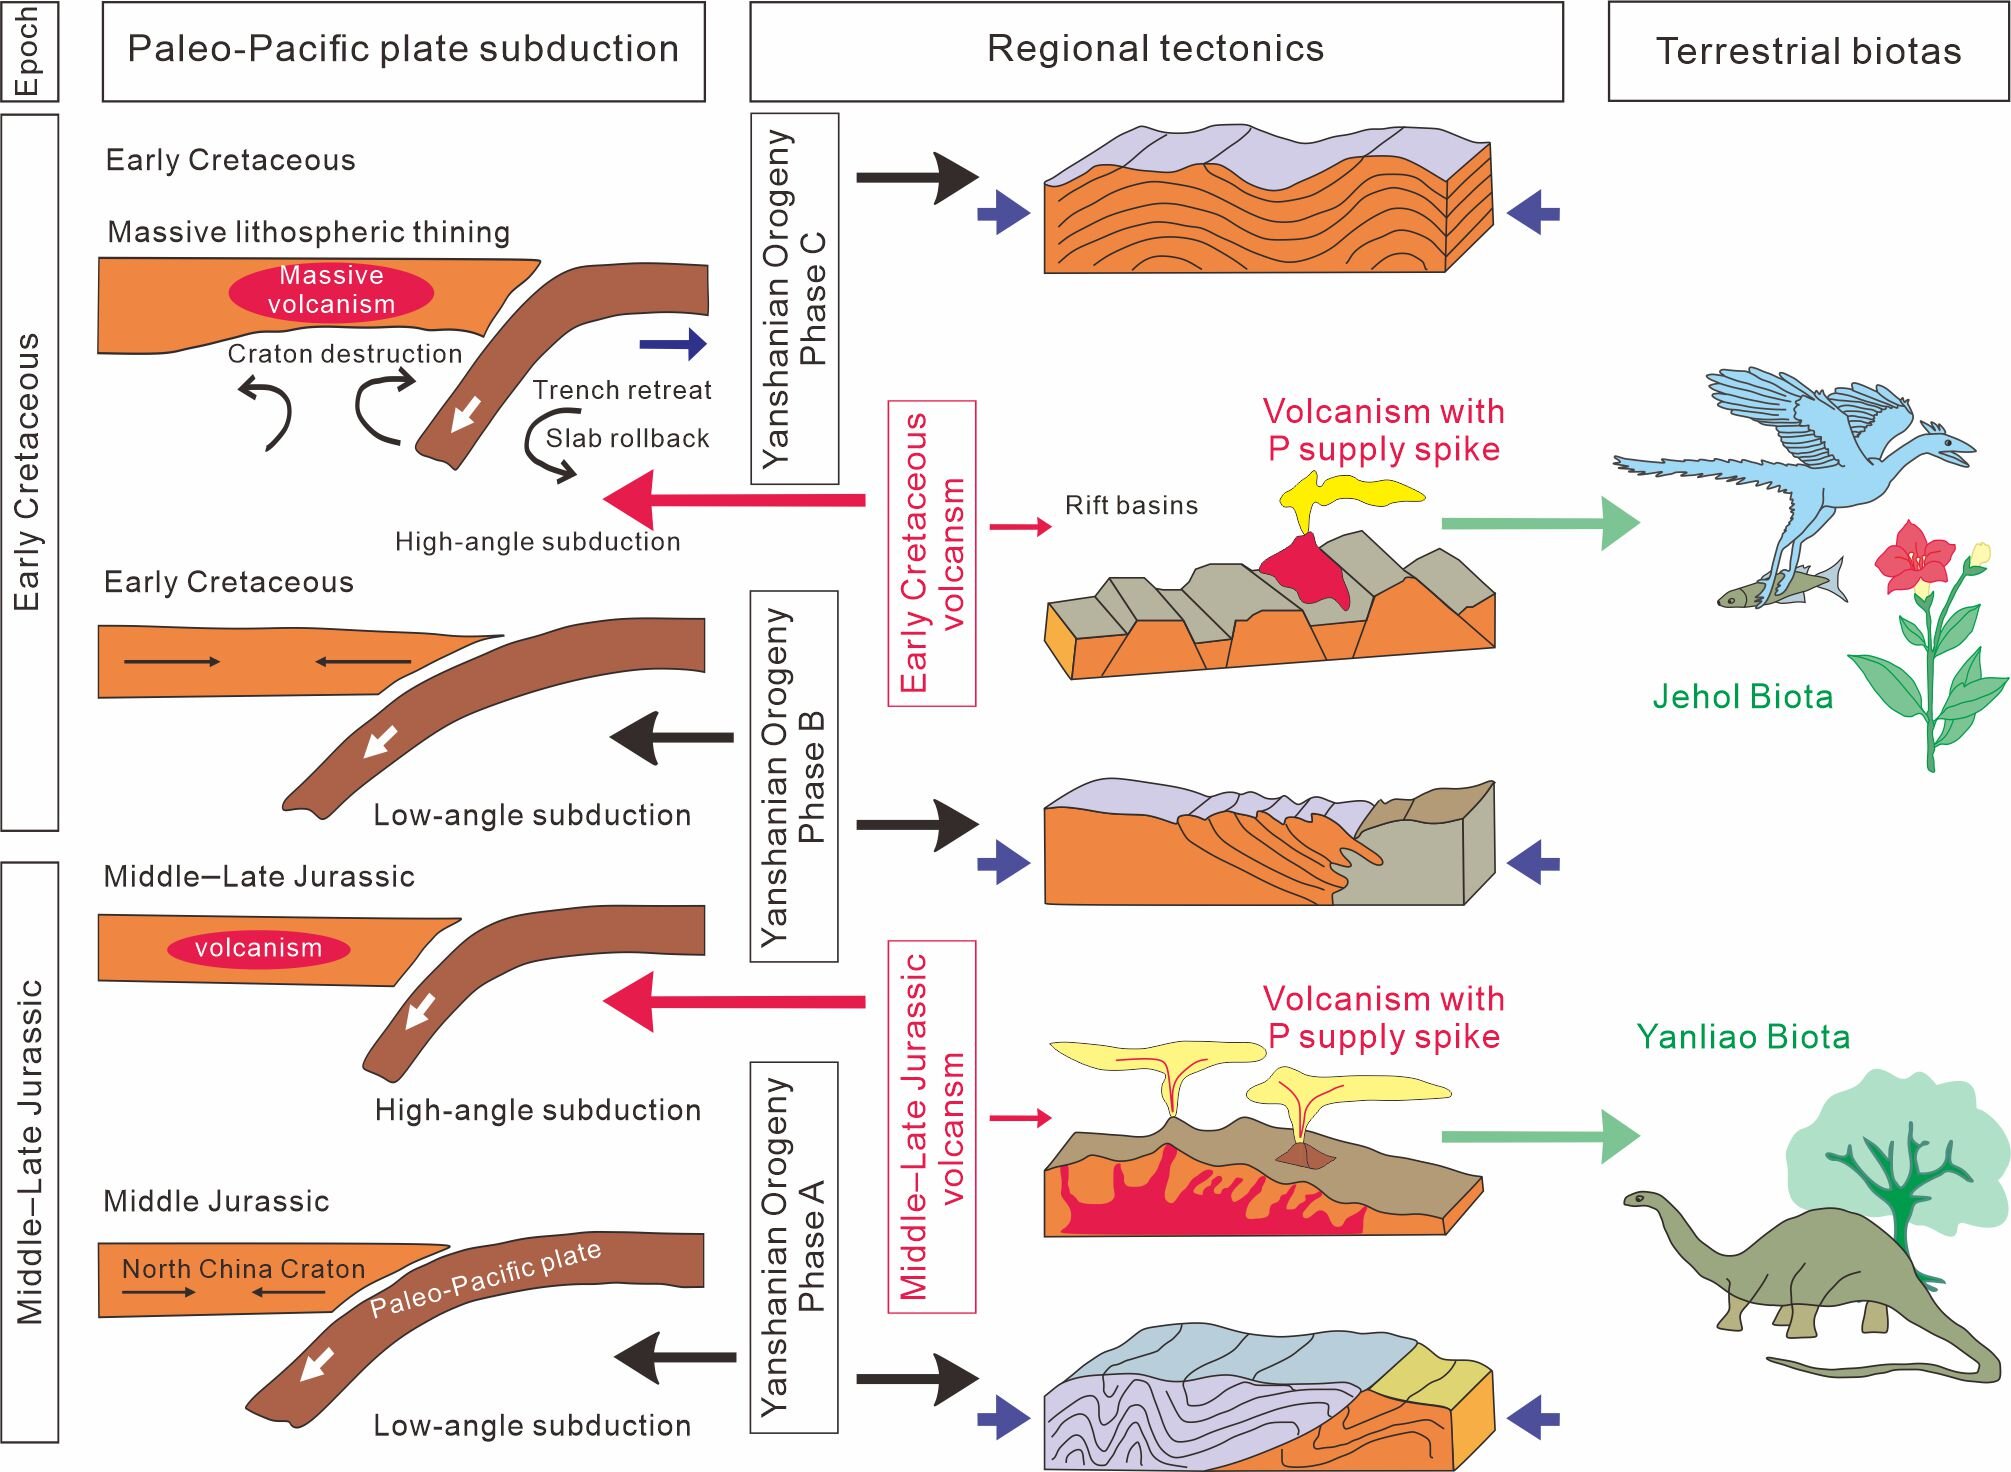 How volcanic phosphorus supply boosted the Jehol Biota in northern China